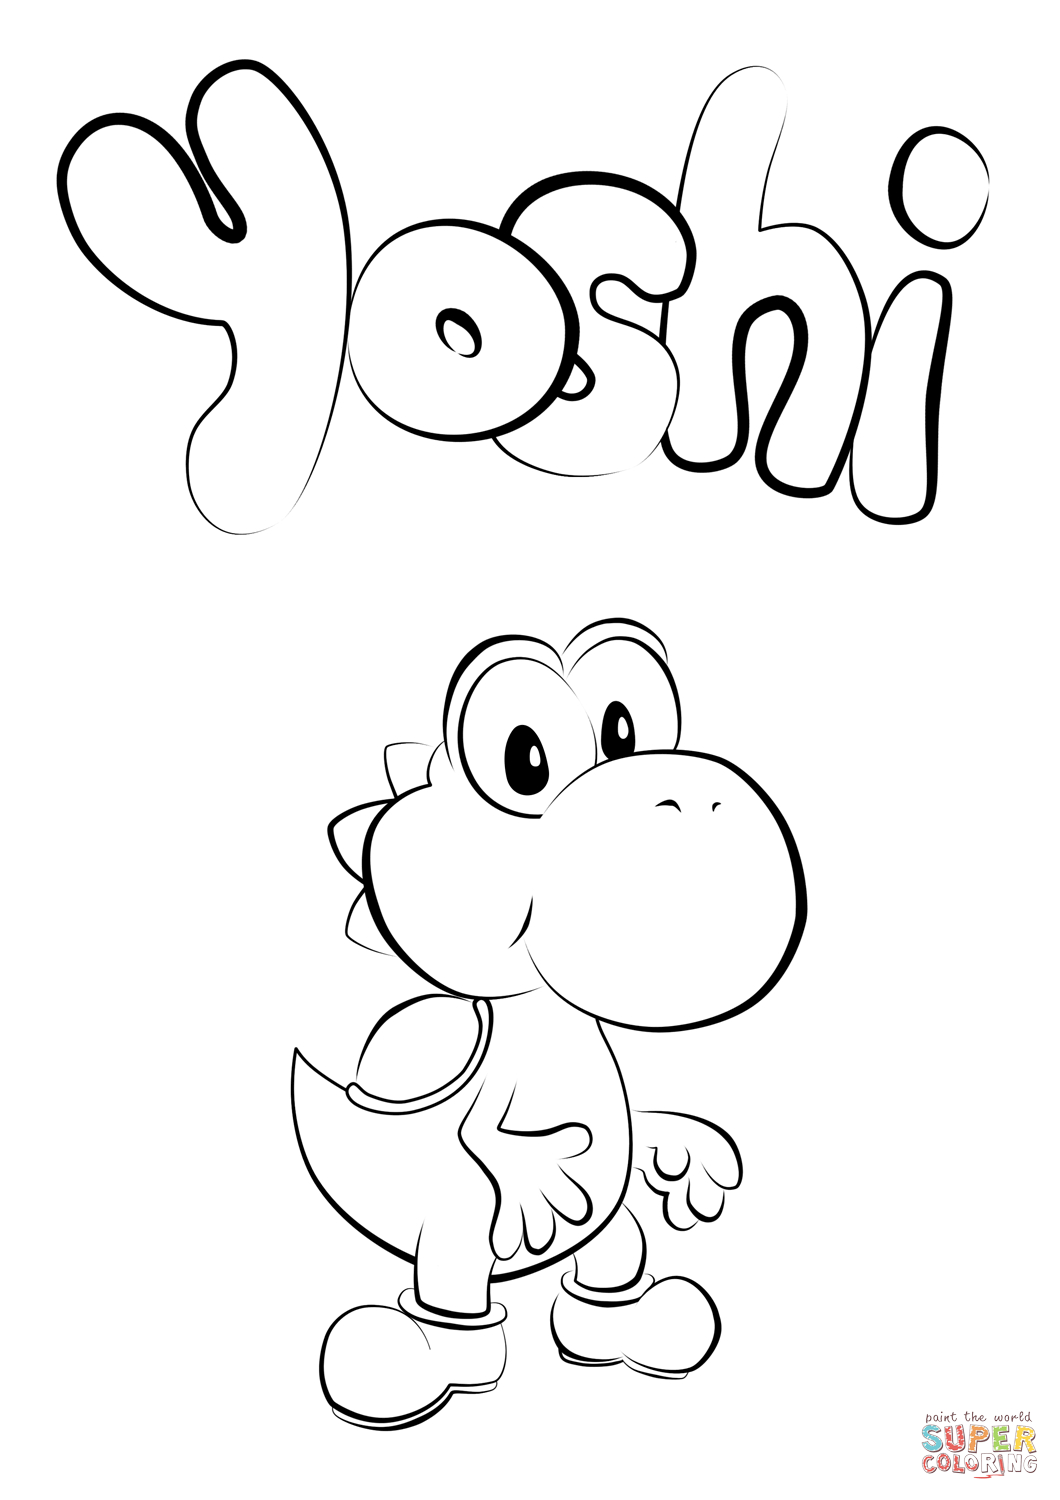 Yoshi Coloring Pages To Print Ba Yoshi Coloring Page Free Printable Coloring Pages